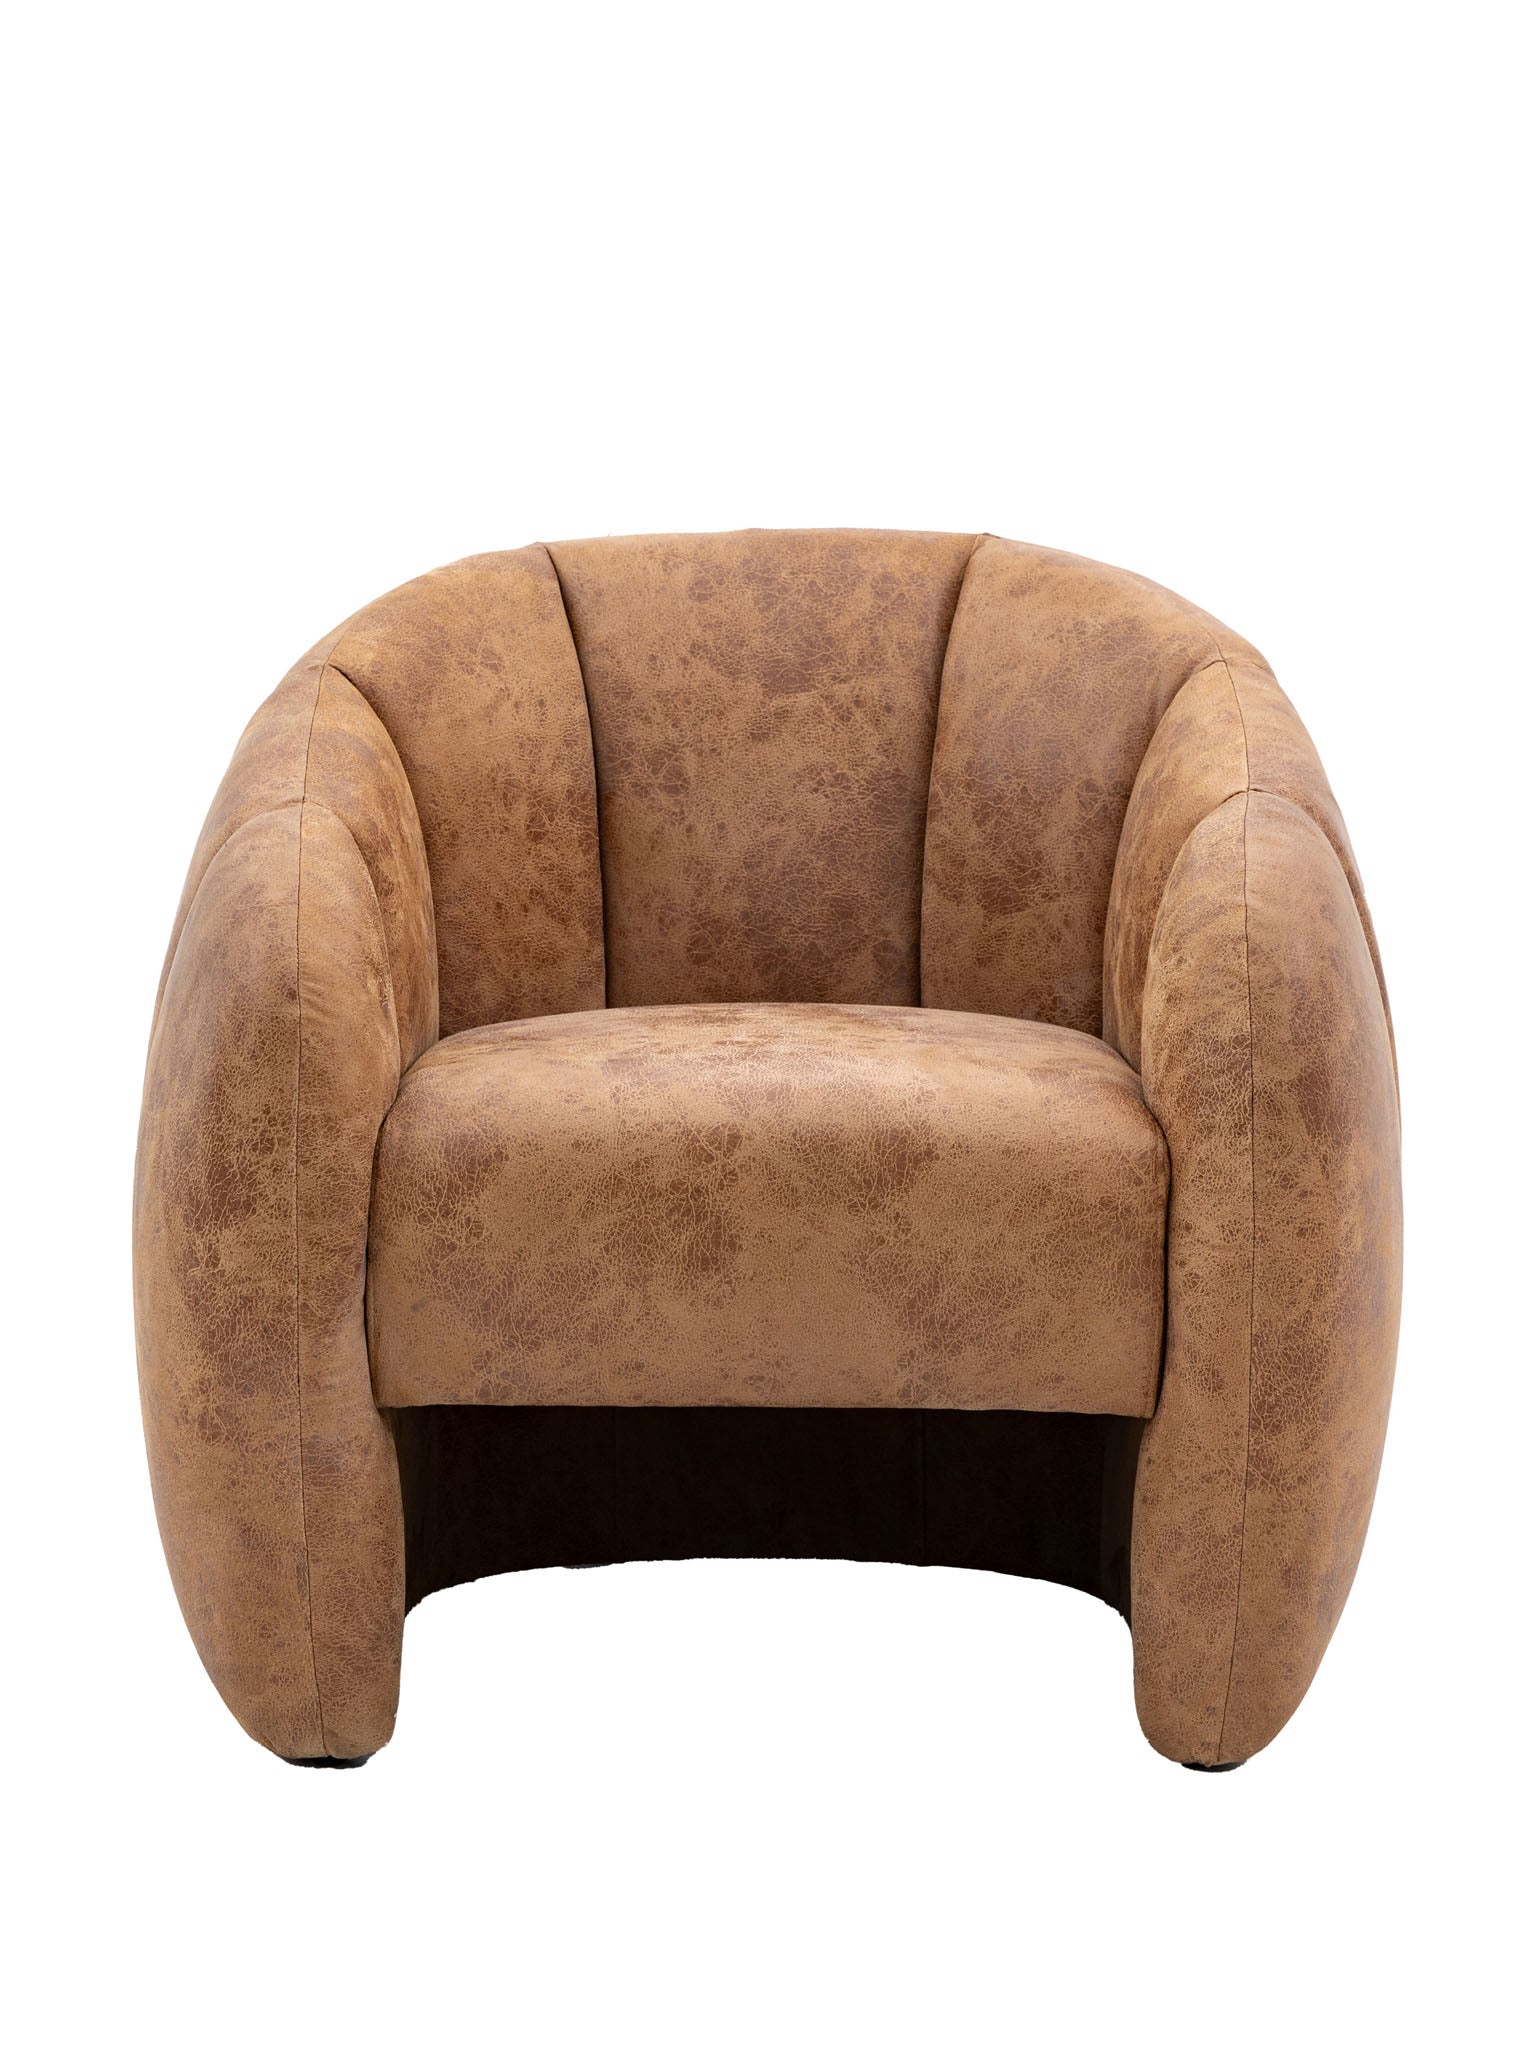 Tub Chair in Antique Tan with Curved Sides